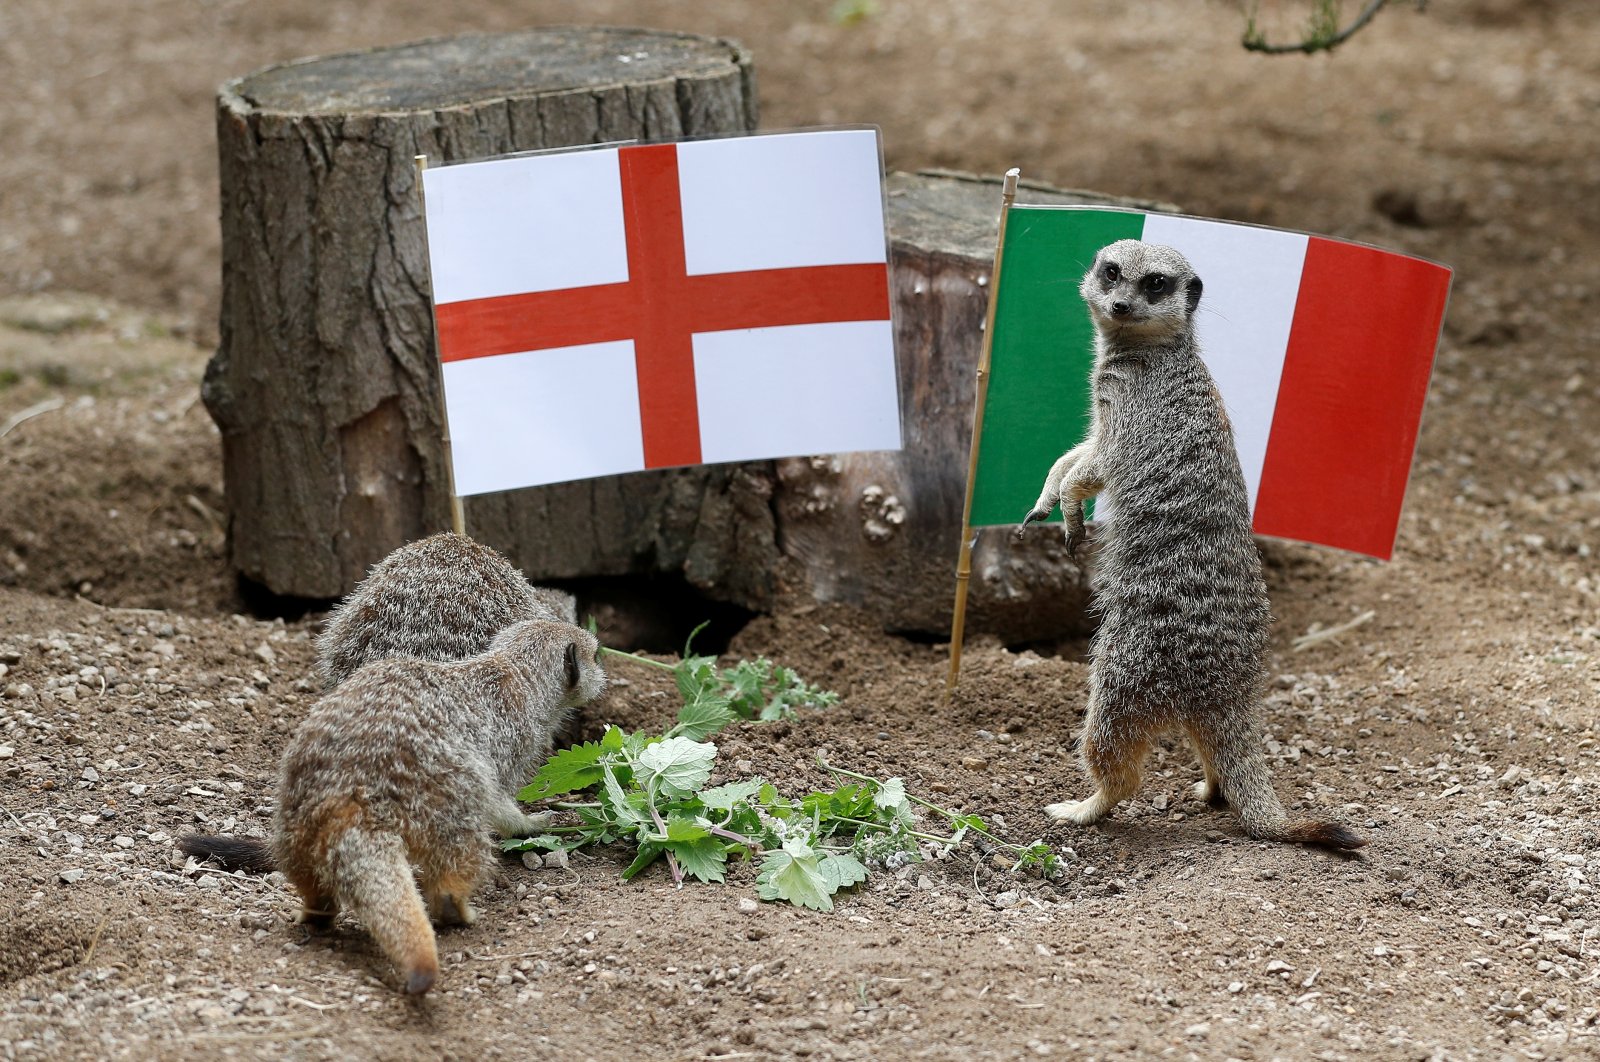 Meerkats play alongside England and Italy flags ahead of the Euro 2020 final, at ZSL London Zoo, London, England, July 8, 2021. (Reuters Photo)